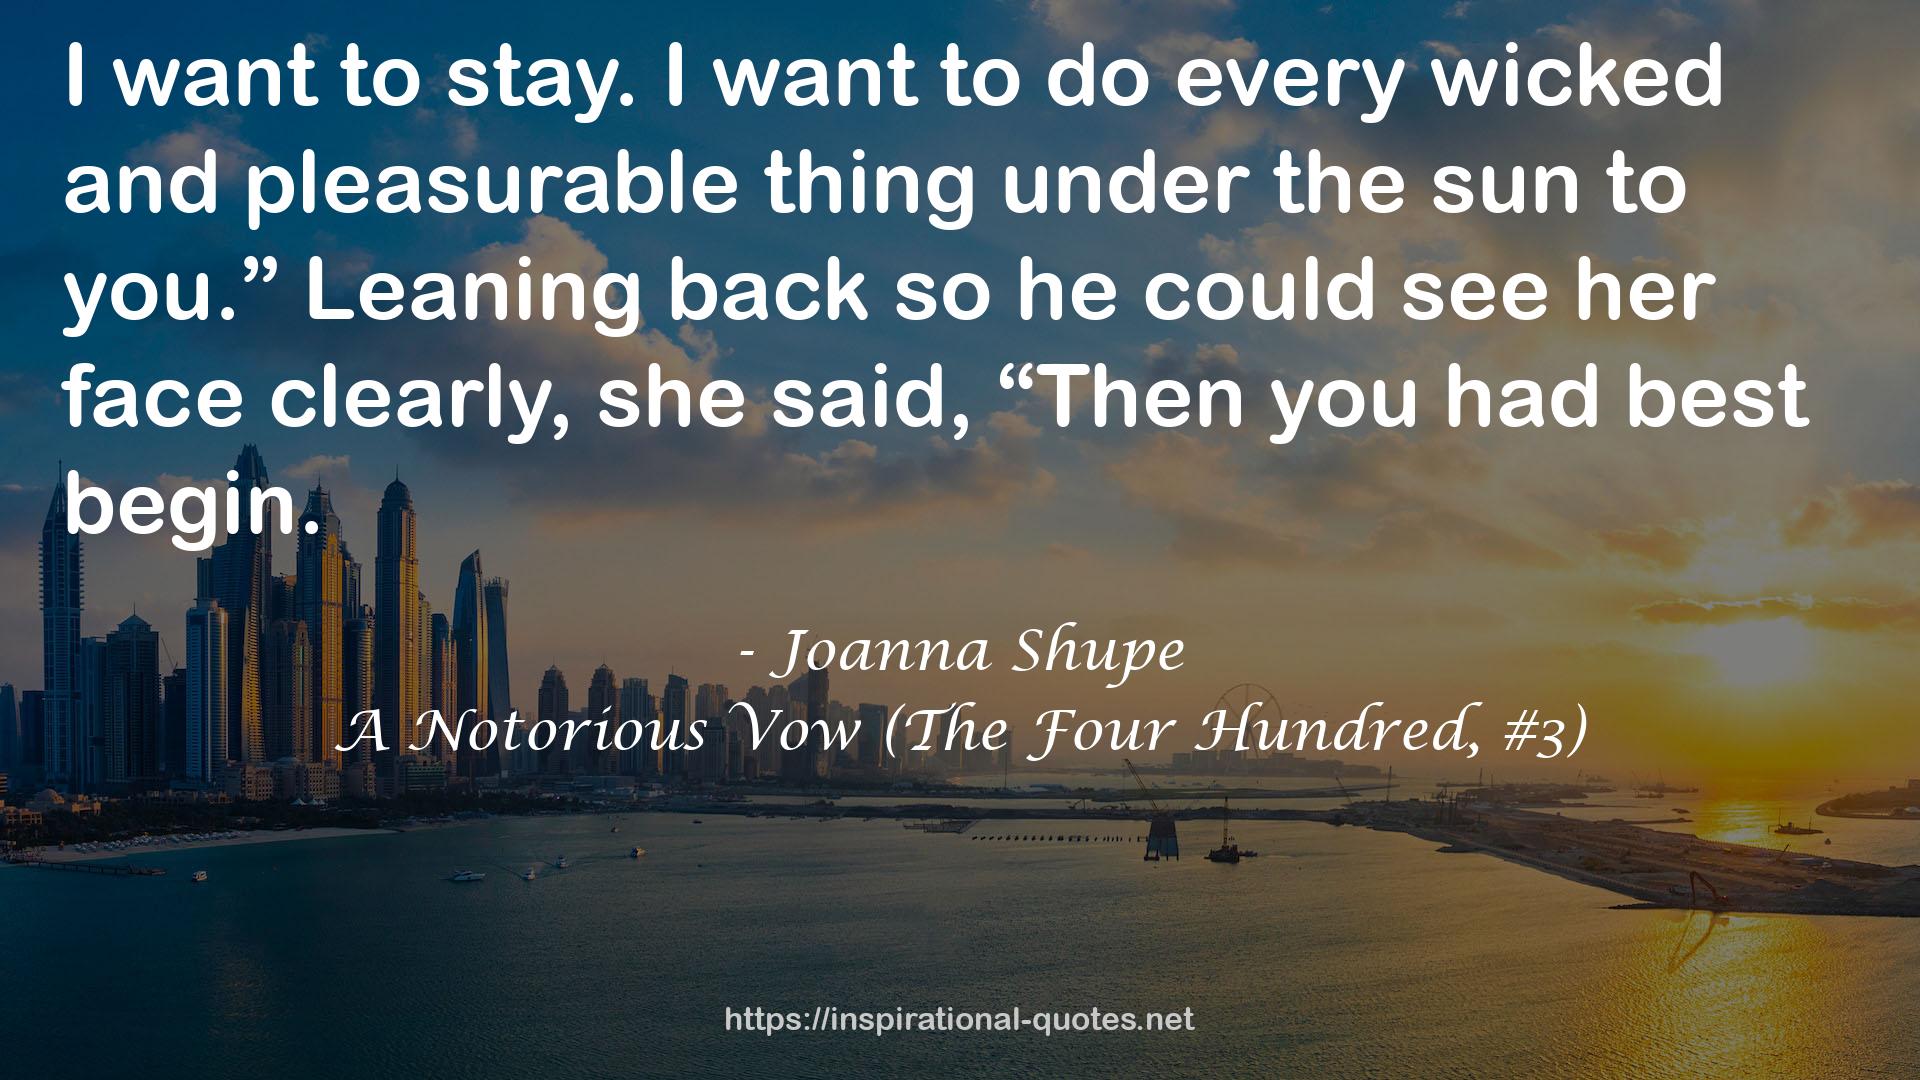 A Notorious Vow (The Four Hundred, #3) QUOTES